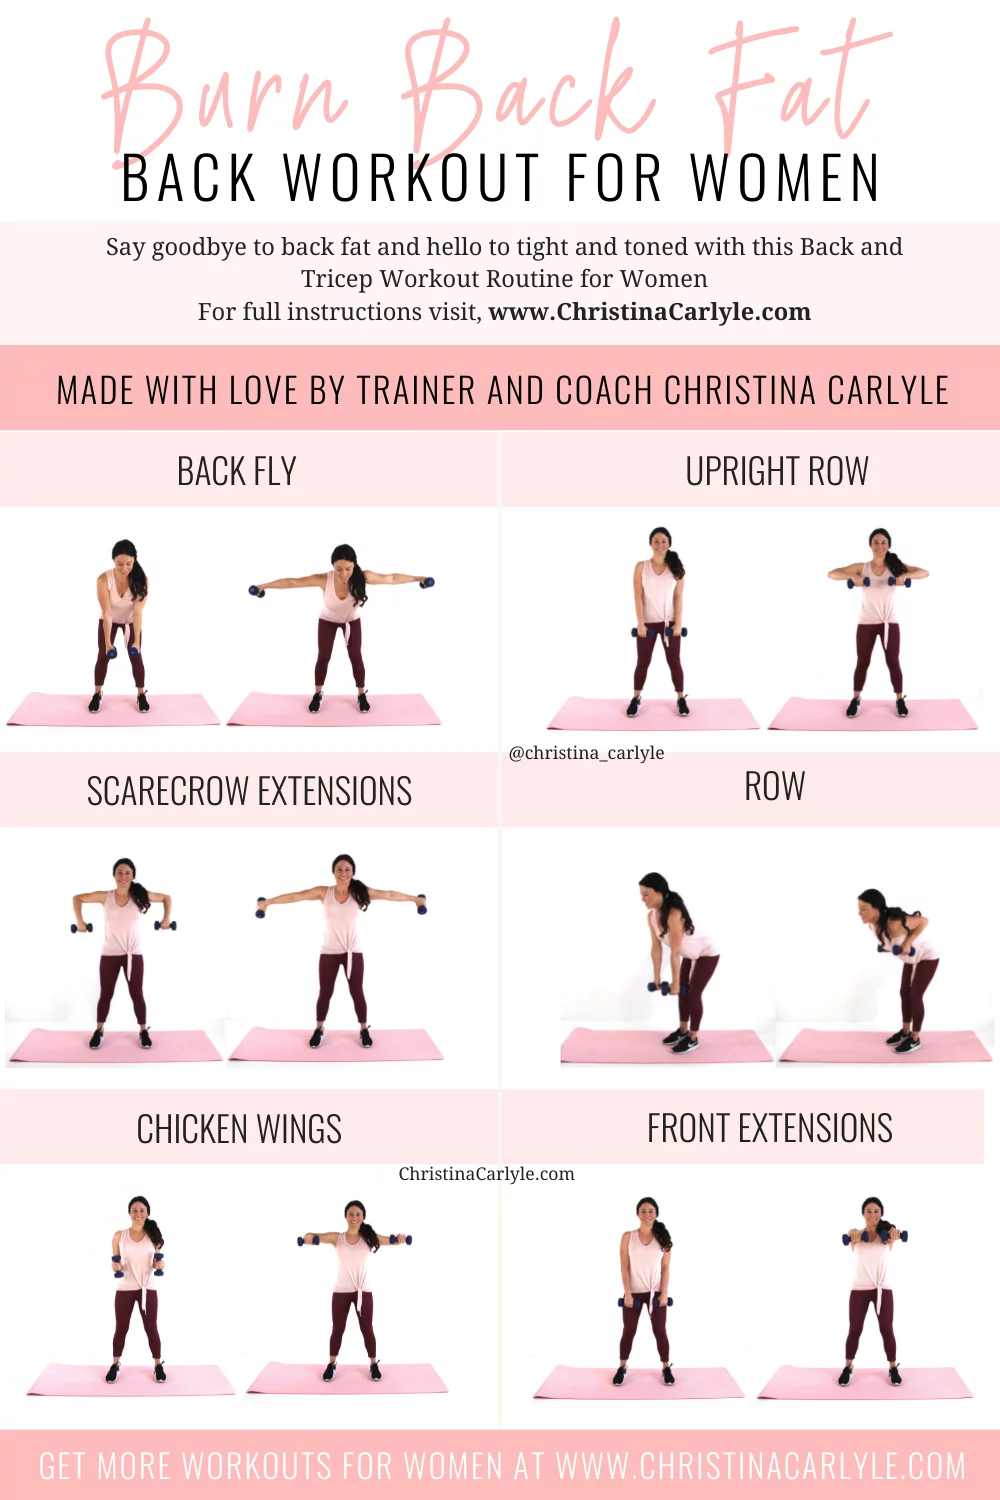 Back Fat Workout For Women being done by Trainer Christina Carlyle